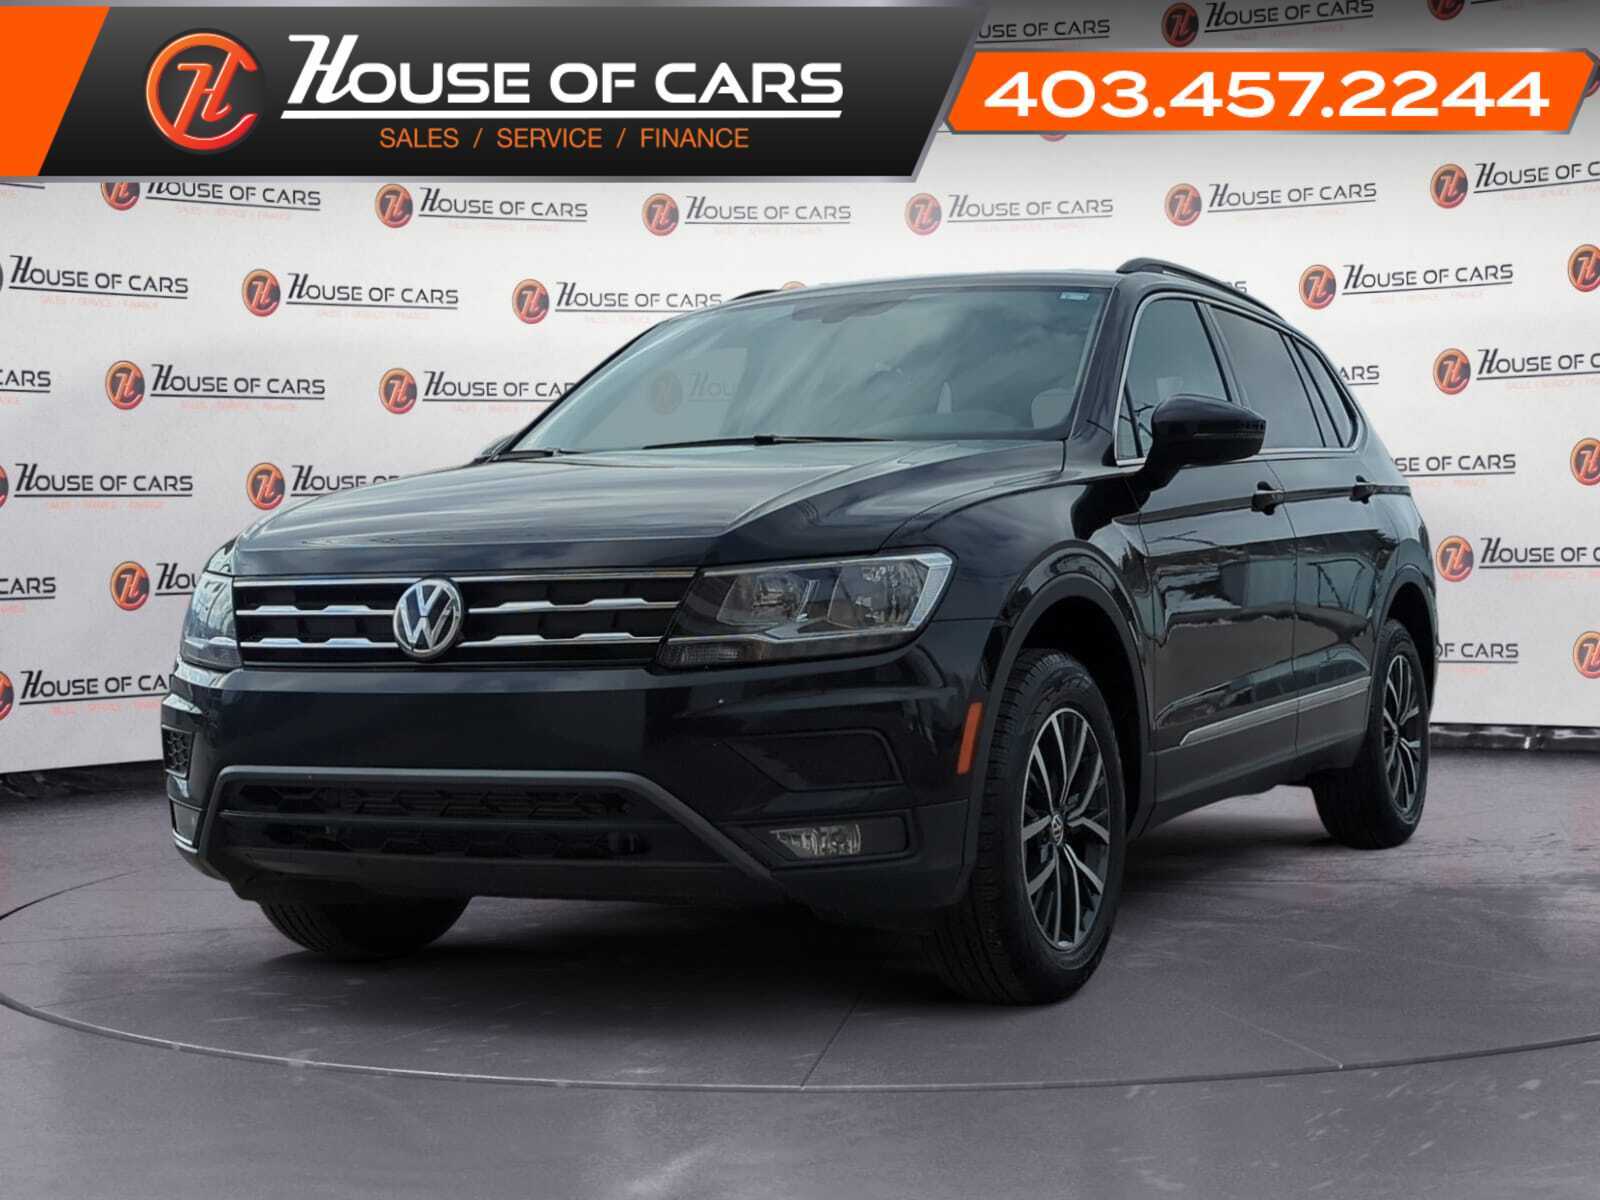 2021 Volkswagen Tiguan Utility 4MOTION Leather Seats Panoramic roof 